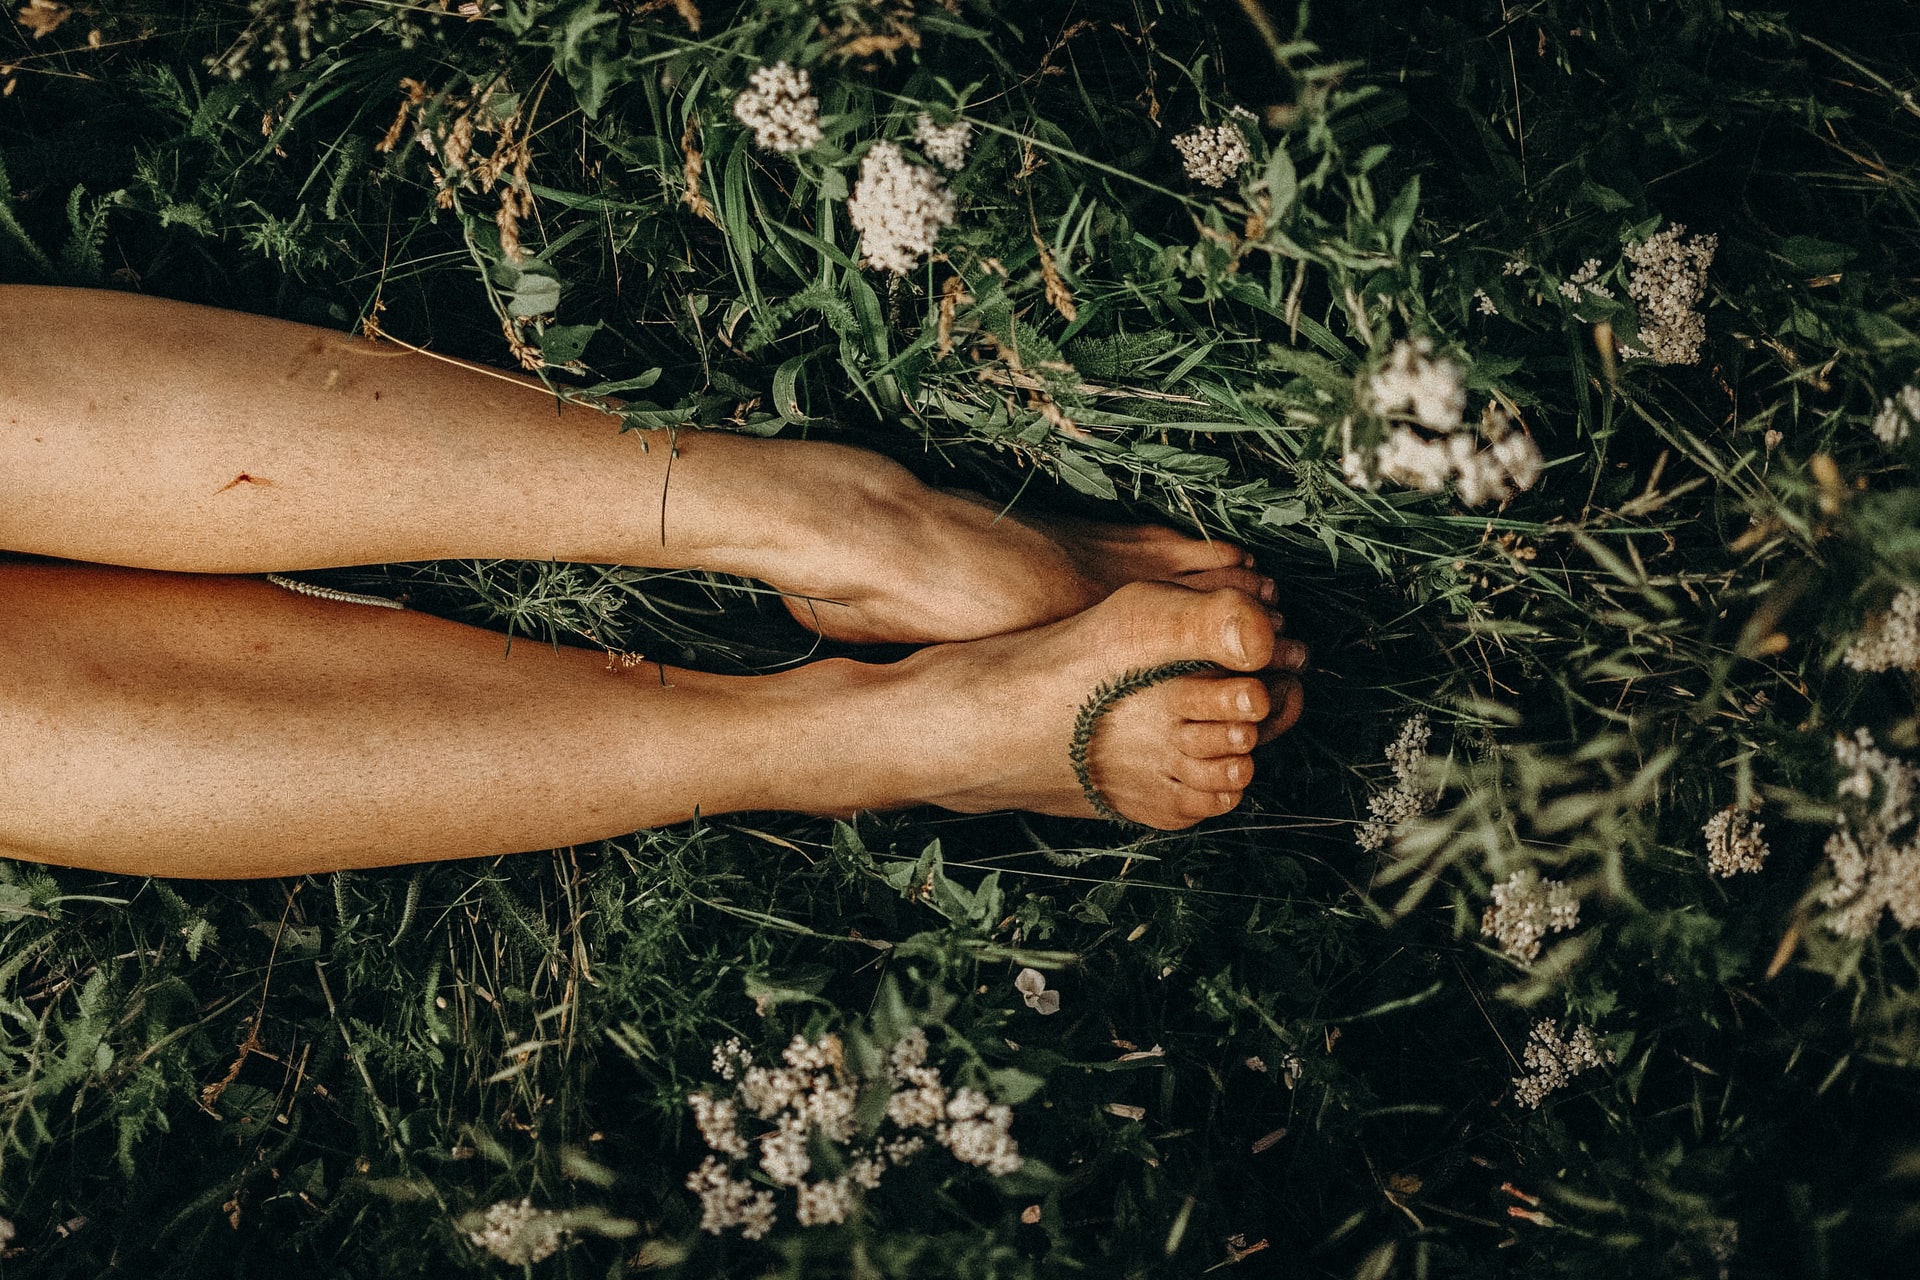 grounding practices with feet on earth